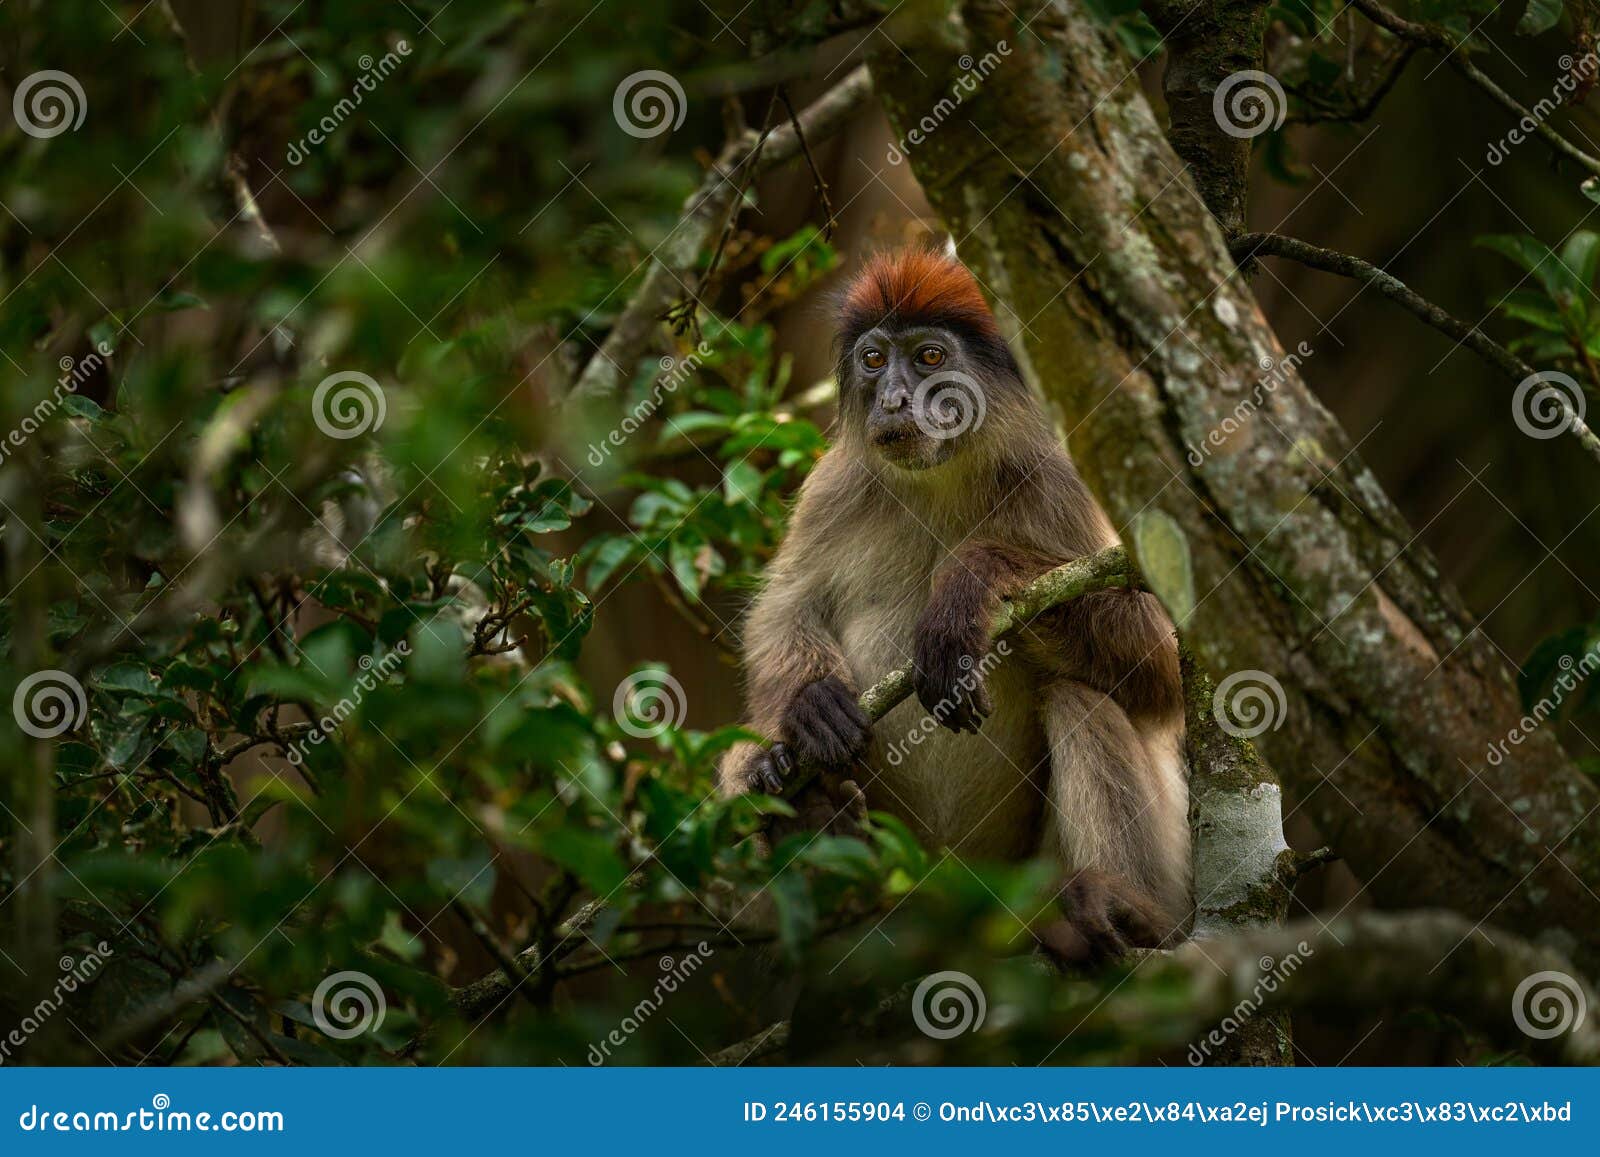 ugandan red colobus, piliocolobus tephrosceles, rufous head grey monkey sitting on tree trunk in tropic forest. red colobus in